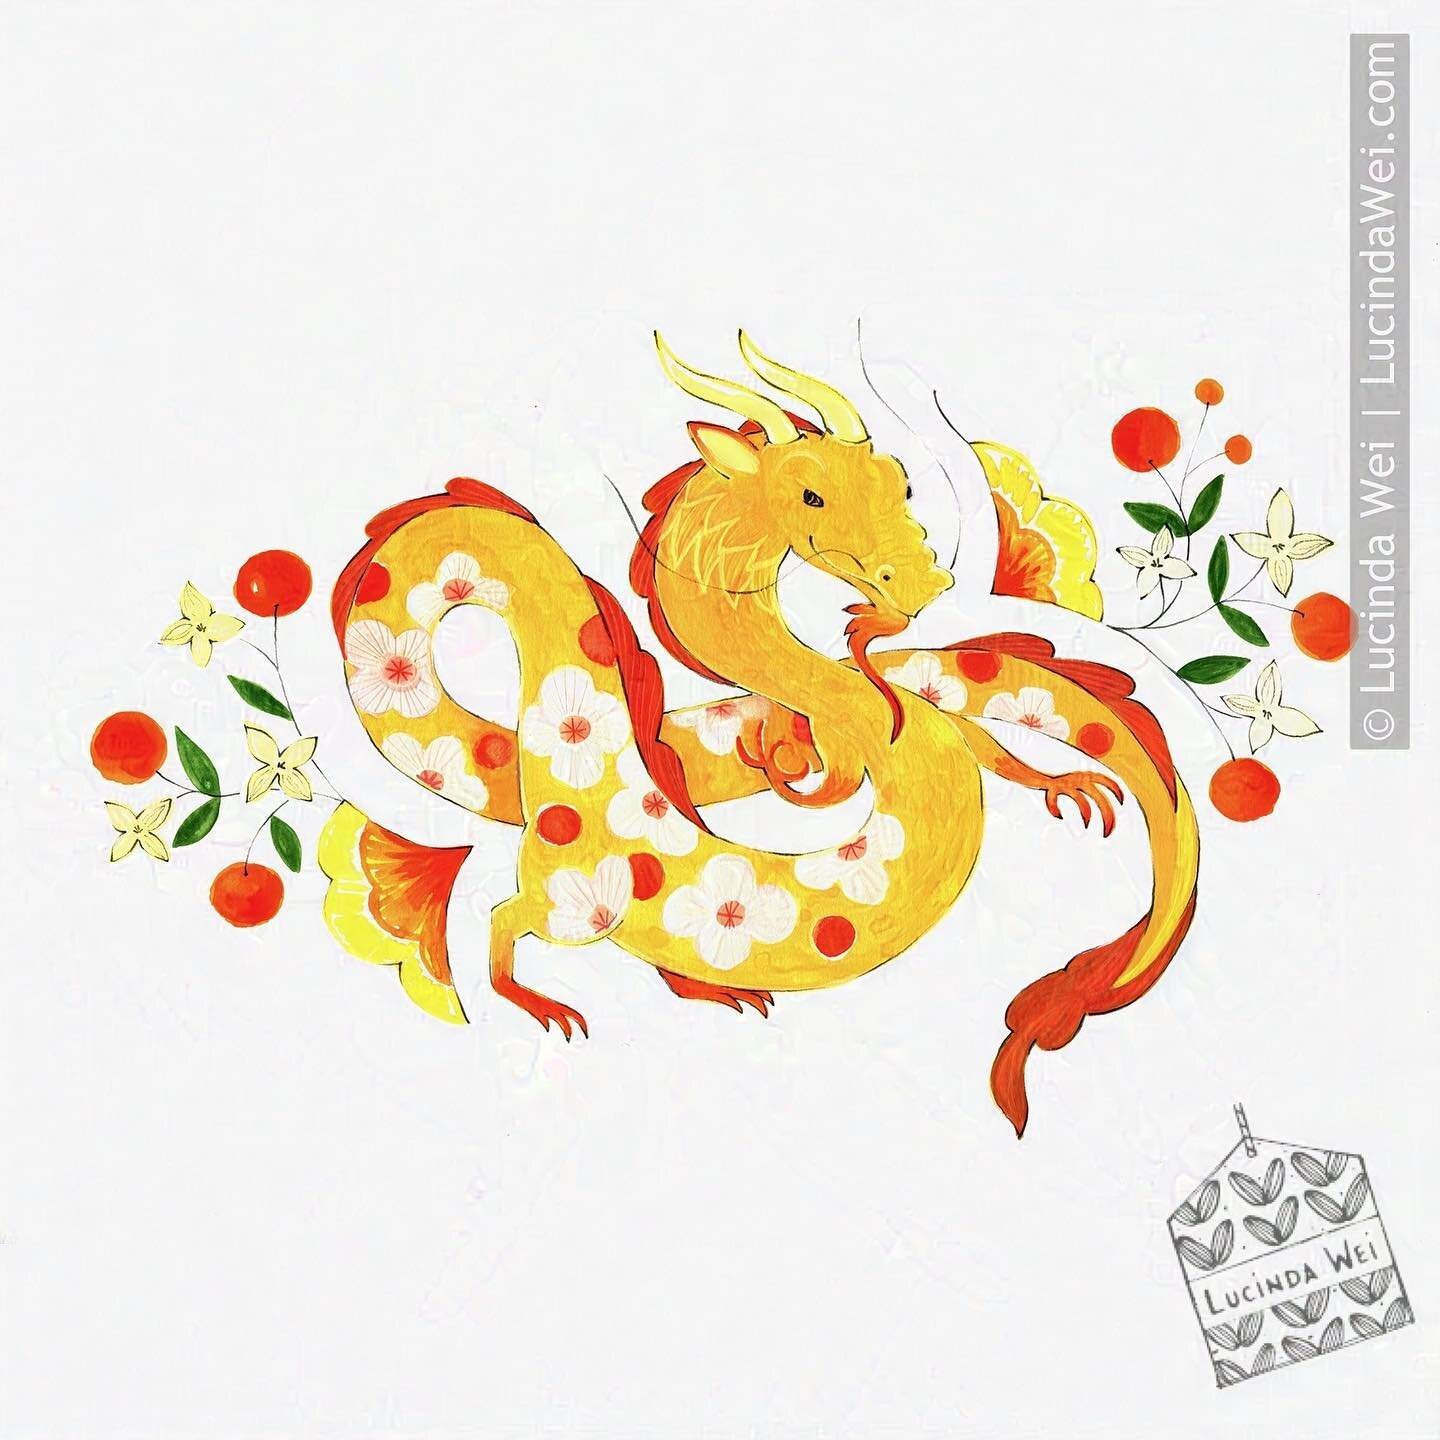 🎉✨ Happy Lunar New Year! 🐉✨

Wishing you all a joy-filled start to the Year of the Wood Dragon 2024! The Wood Dragon year is said to bring a balance of strength and adaptability, inspiring us to pursue our dreams with resilience and determination. 